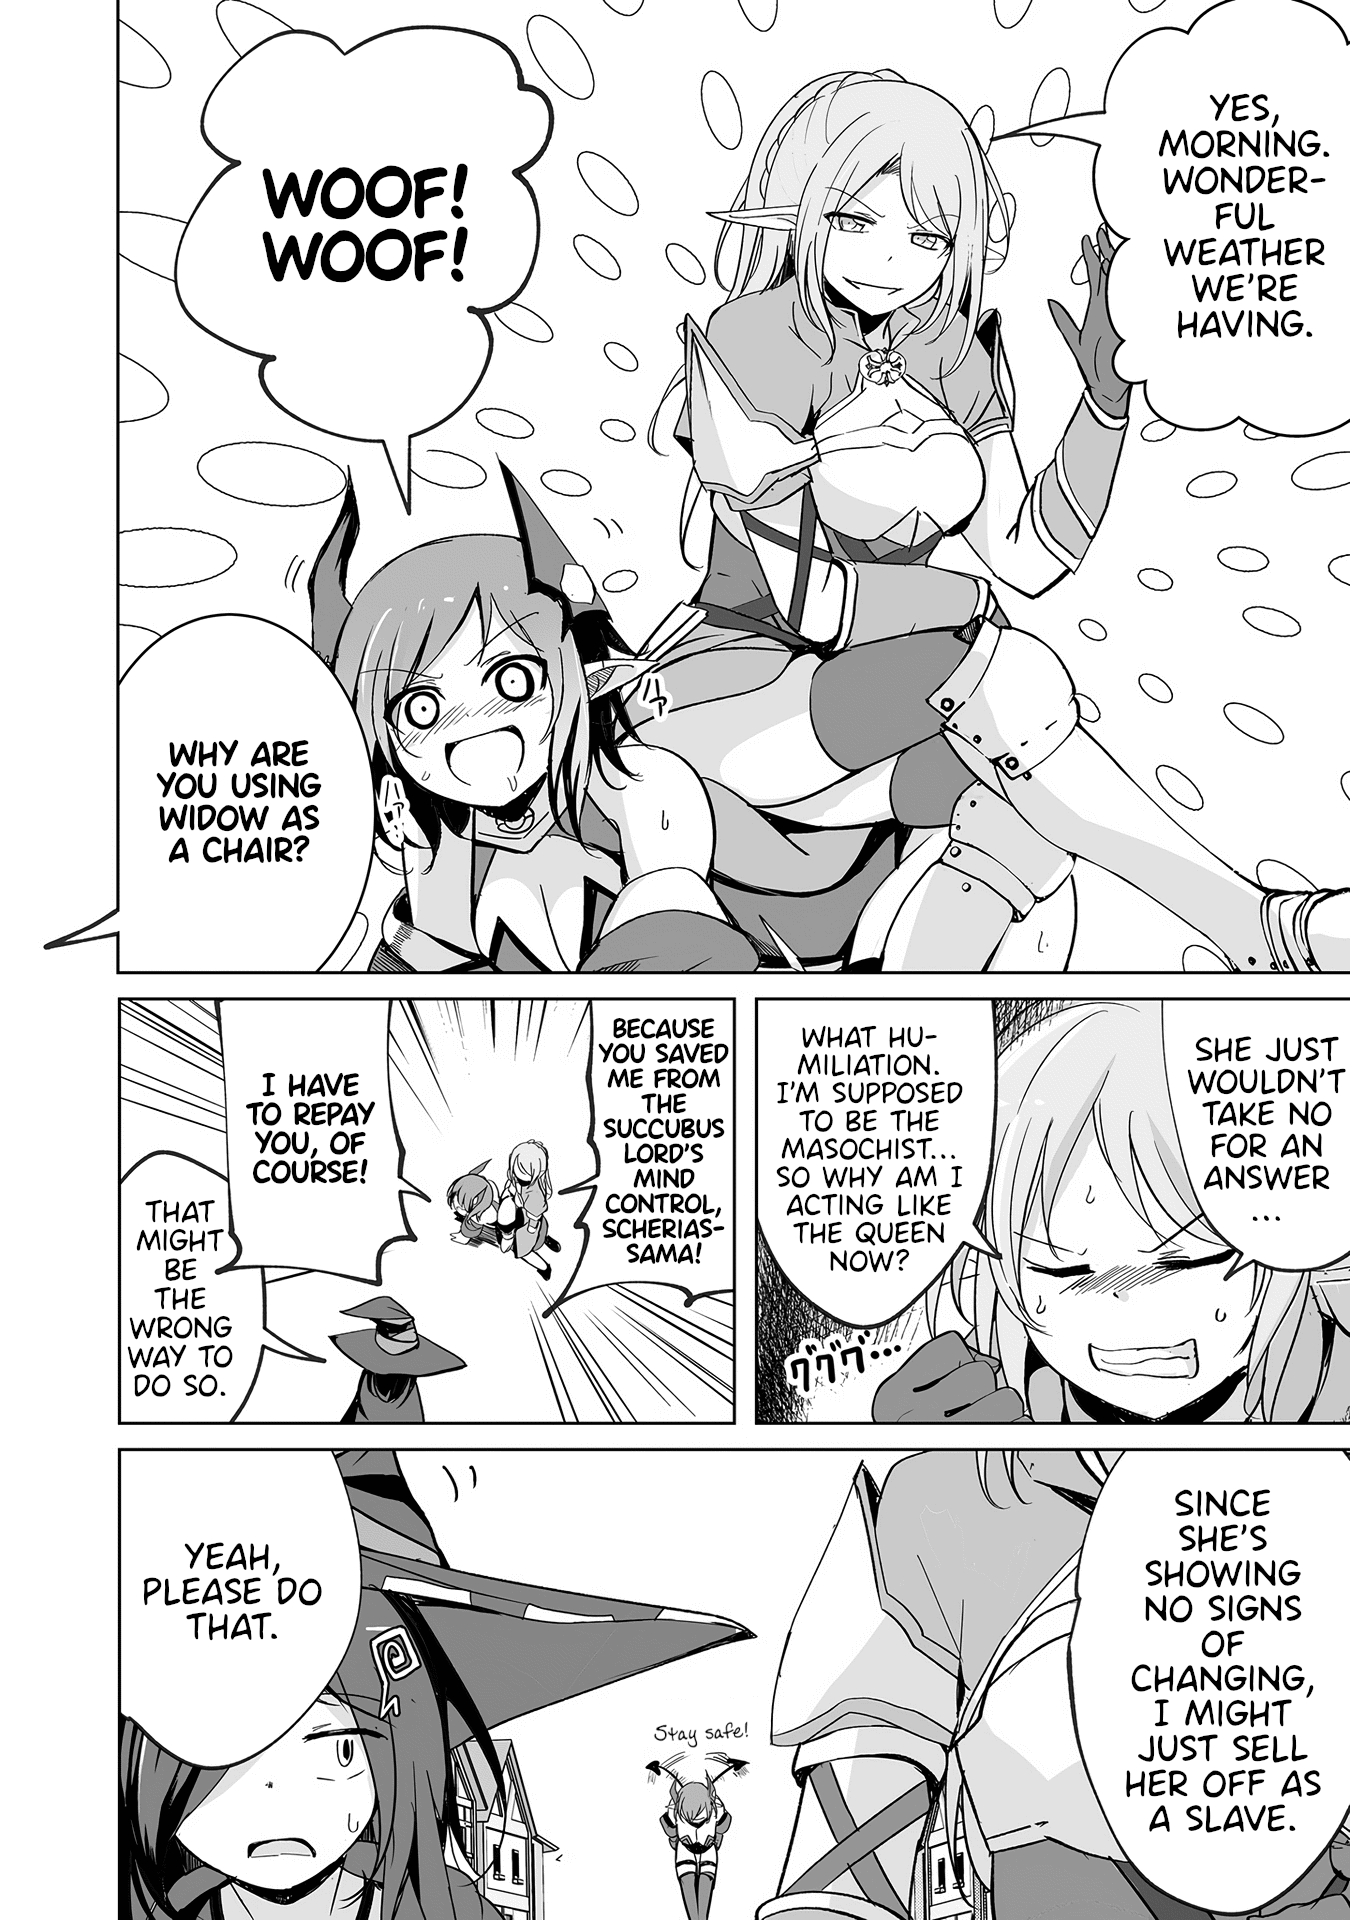 Dunking On Succubi In Another World - Page 2